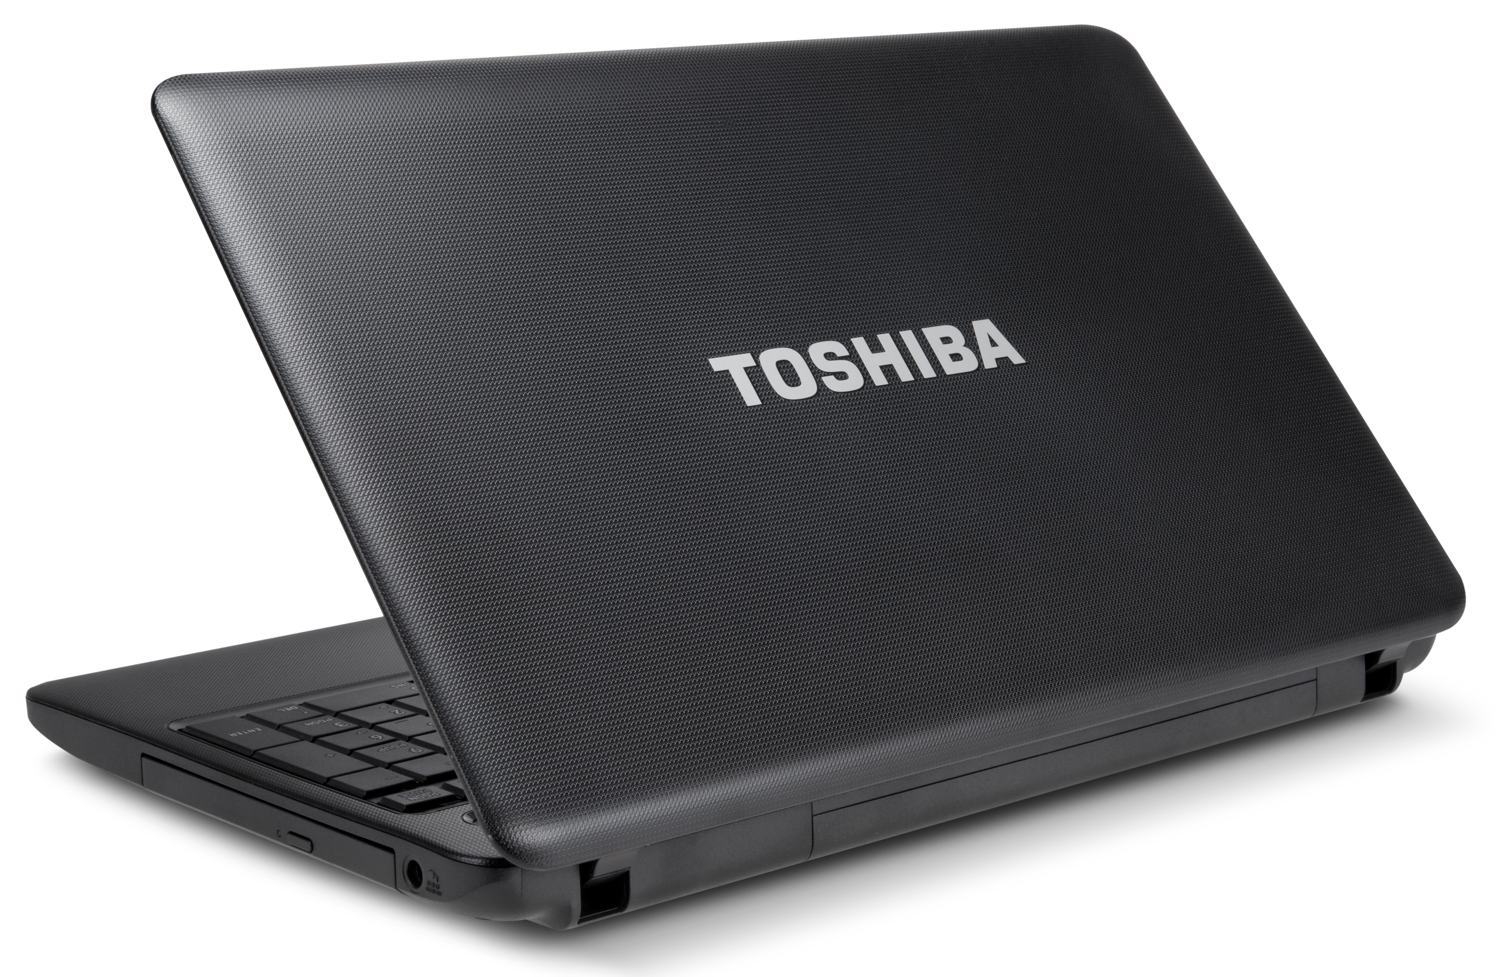 http://thetechjournal.com/wp-content/uploads/images/1110/1319098195-toshiba-satellite-c655ds5336-156inch-laptop-4.jpg